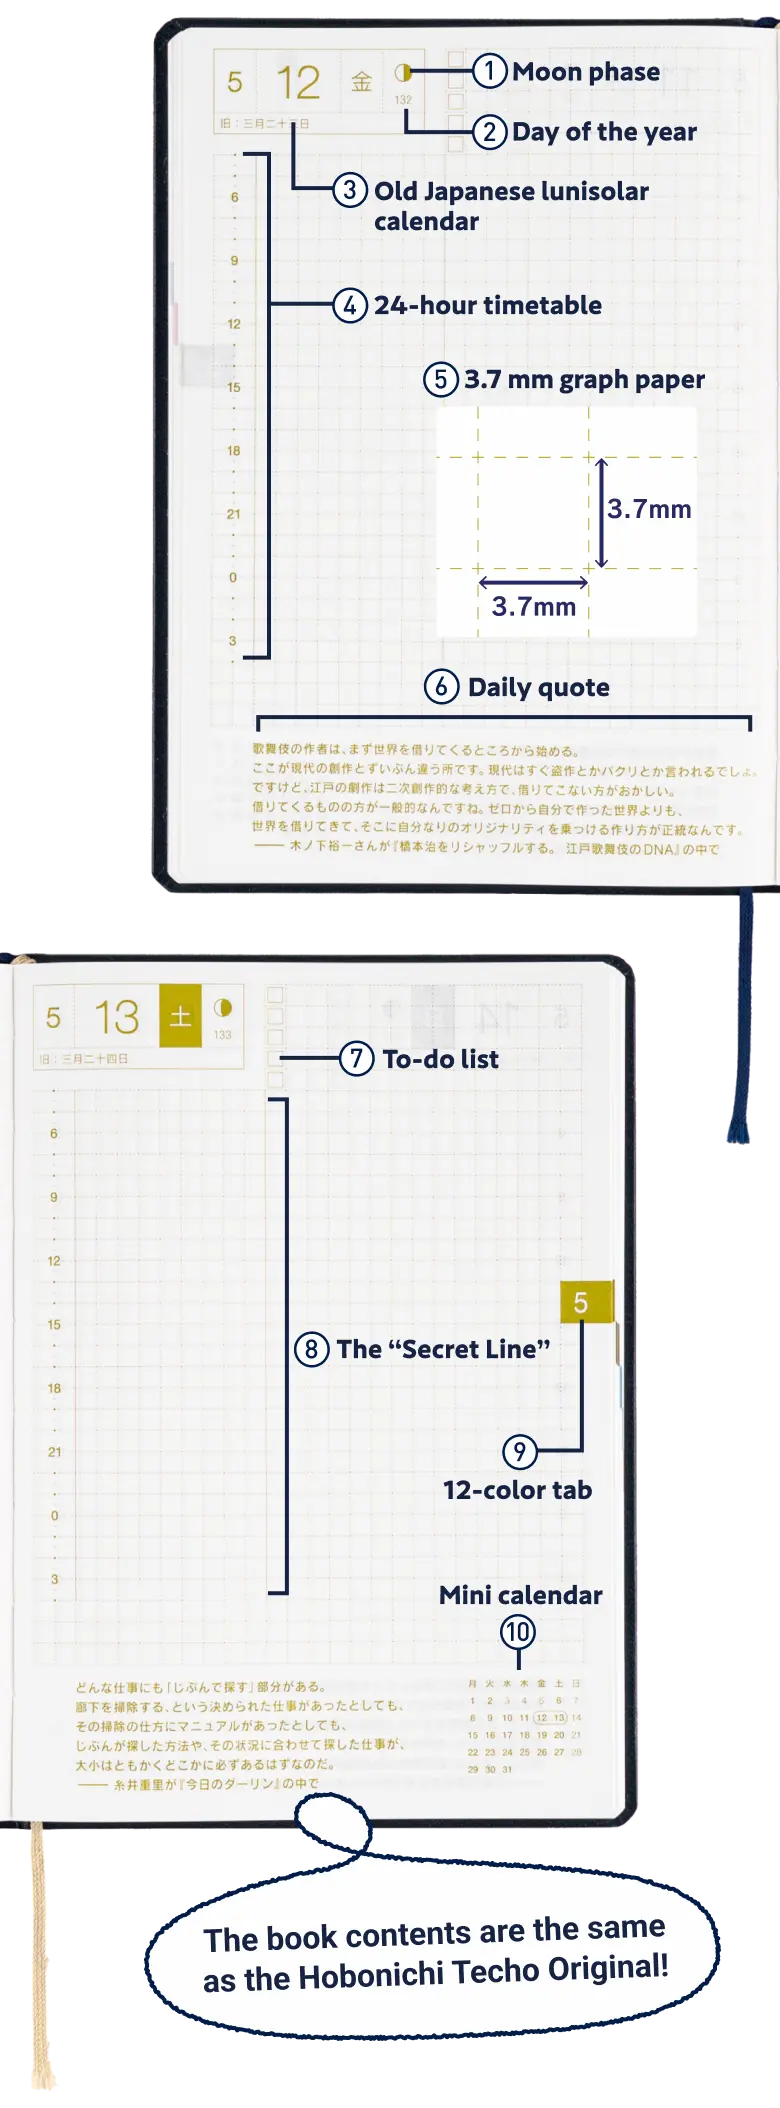 The book contents are the same as the Hobonichi Techo Original!